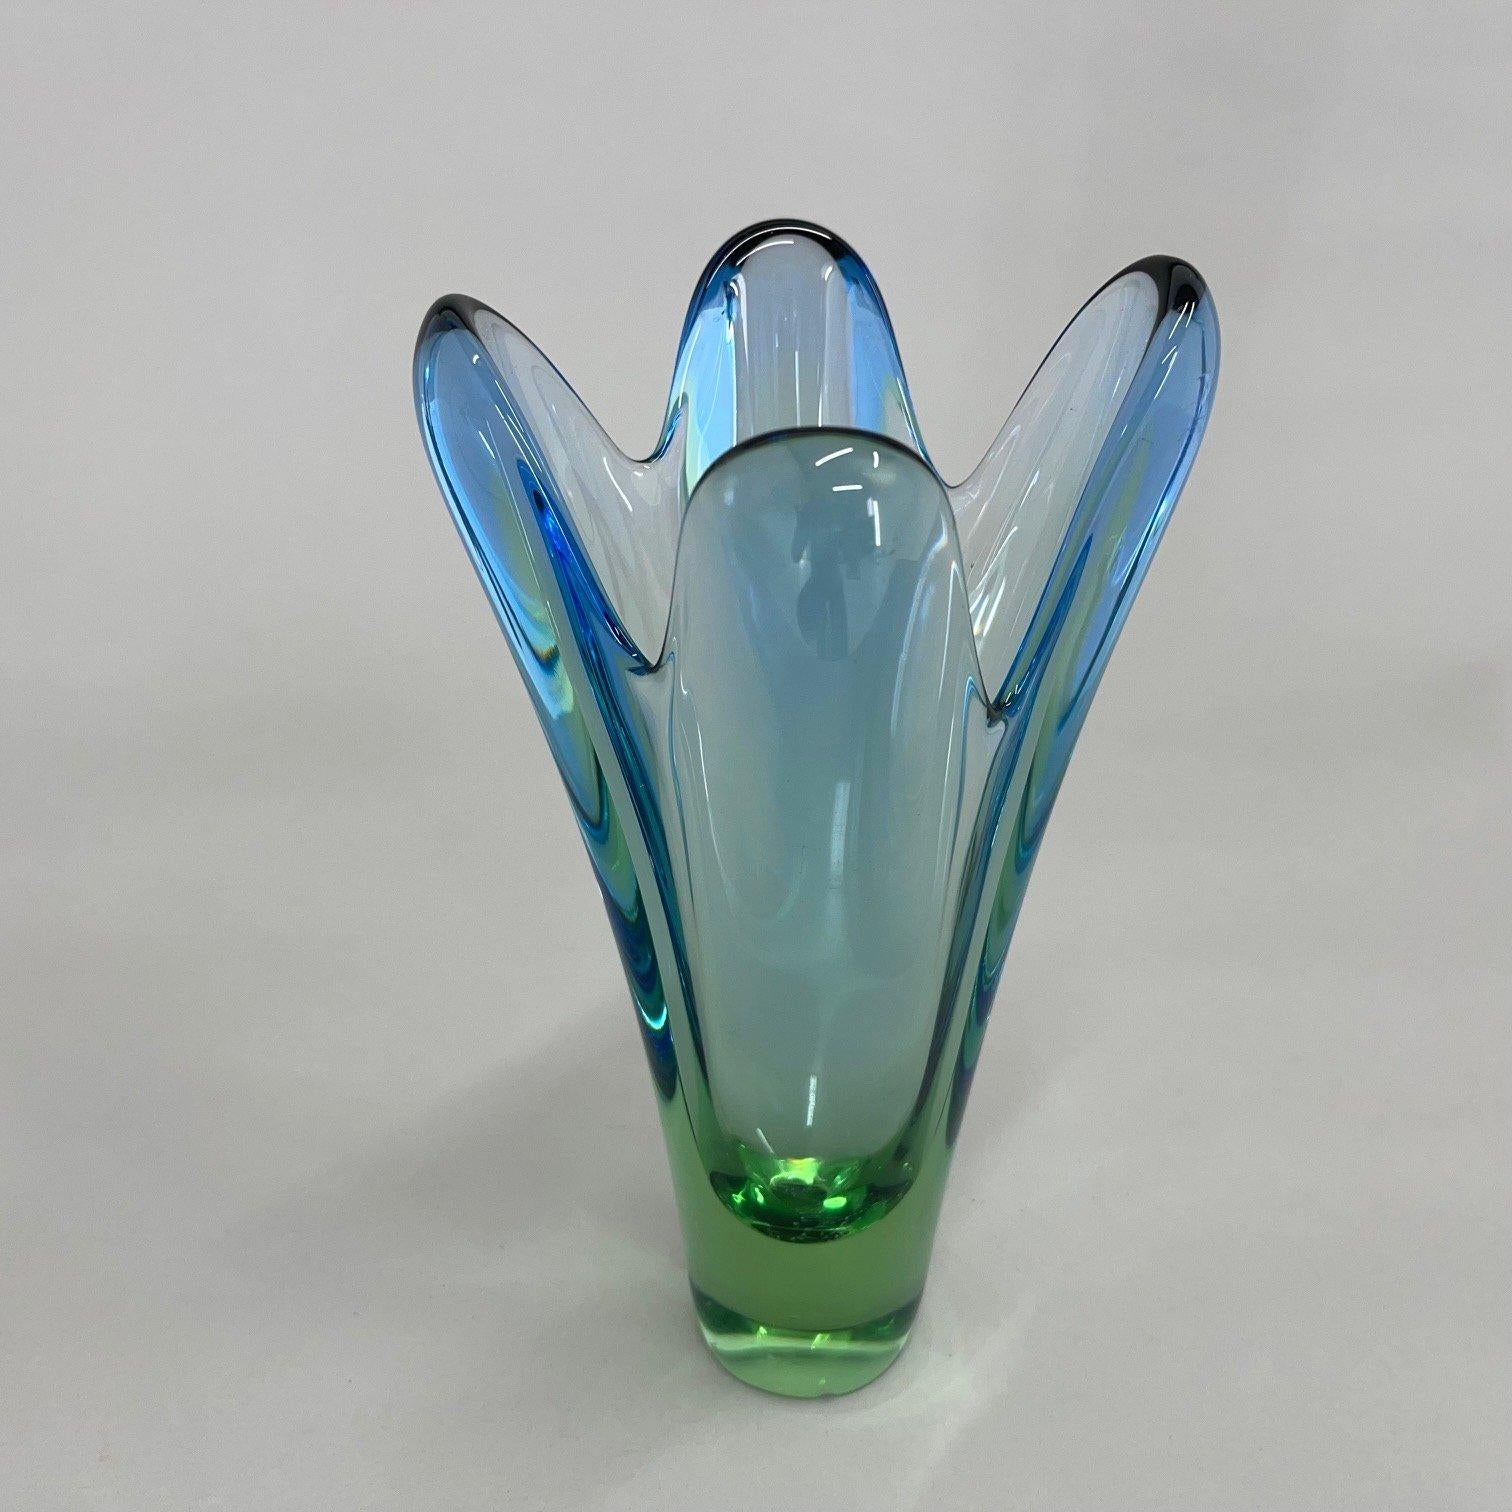 Beautiful art glass vase by famous designer Josef Hospodka for Chribská Glassworks in former Czechoslovakia. There is one small chip at the bottom, see photo.